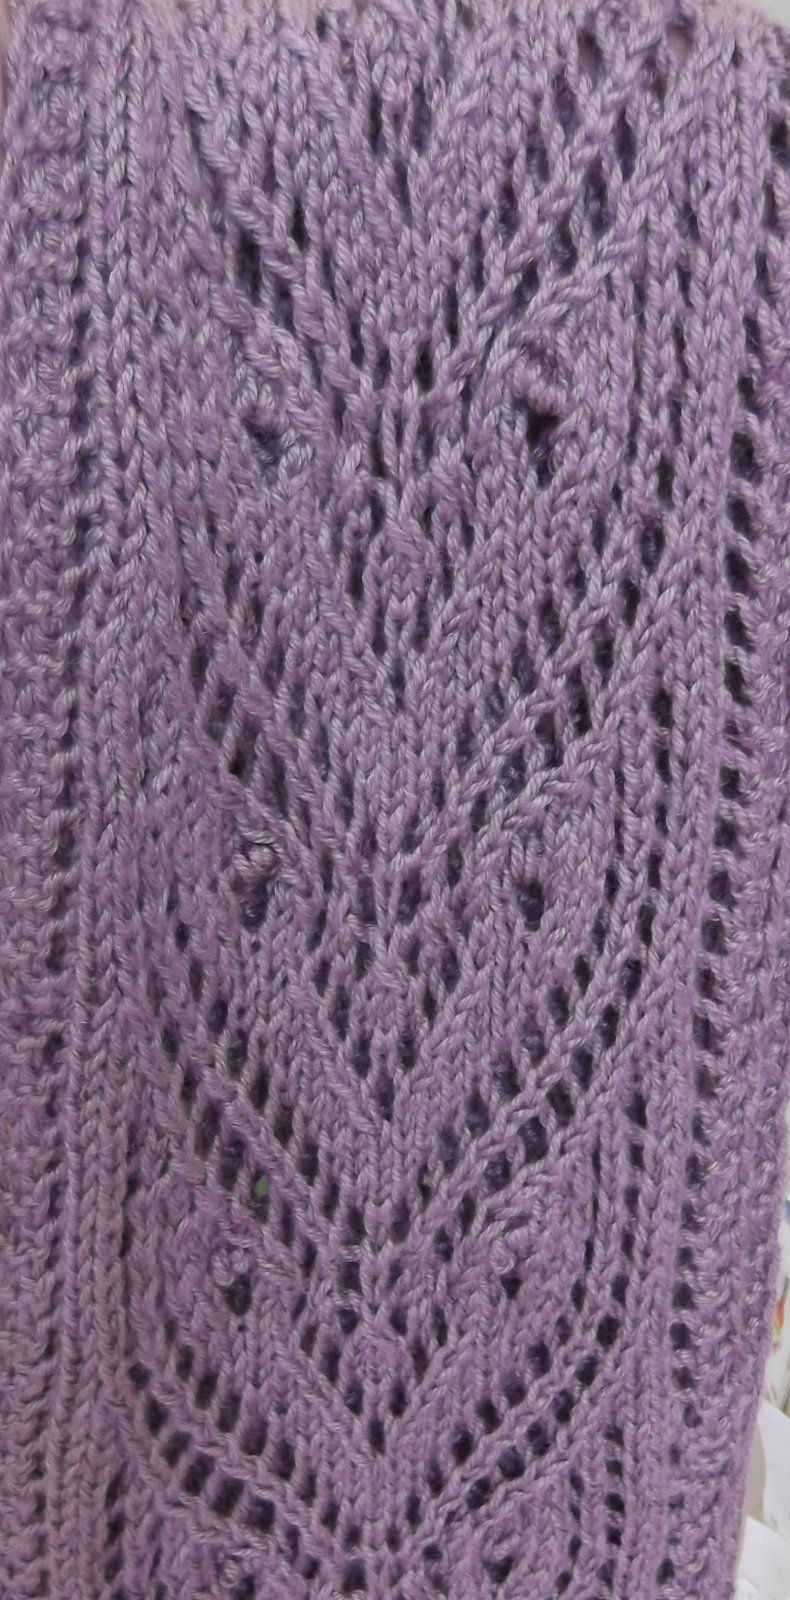 Leona's Lace After Blocking